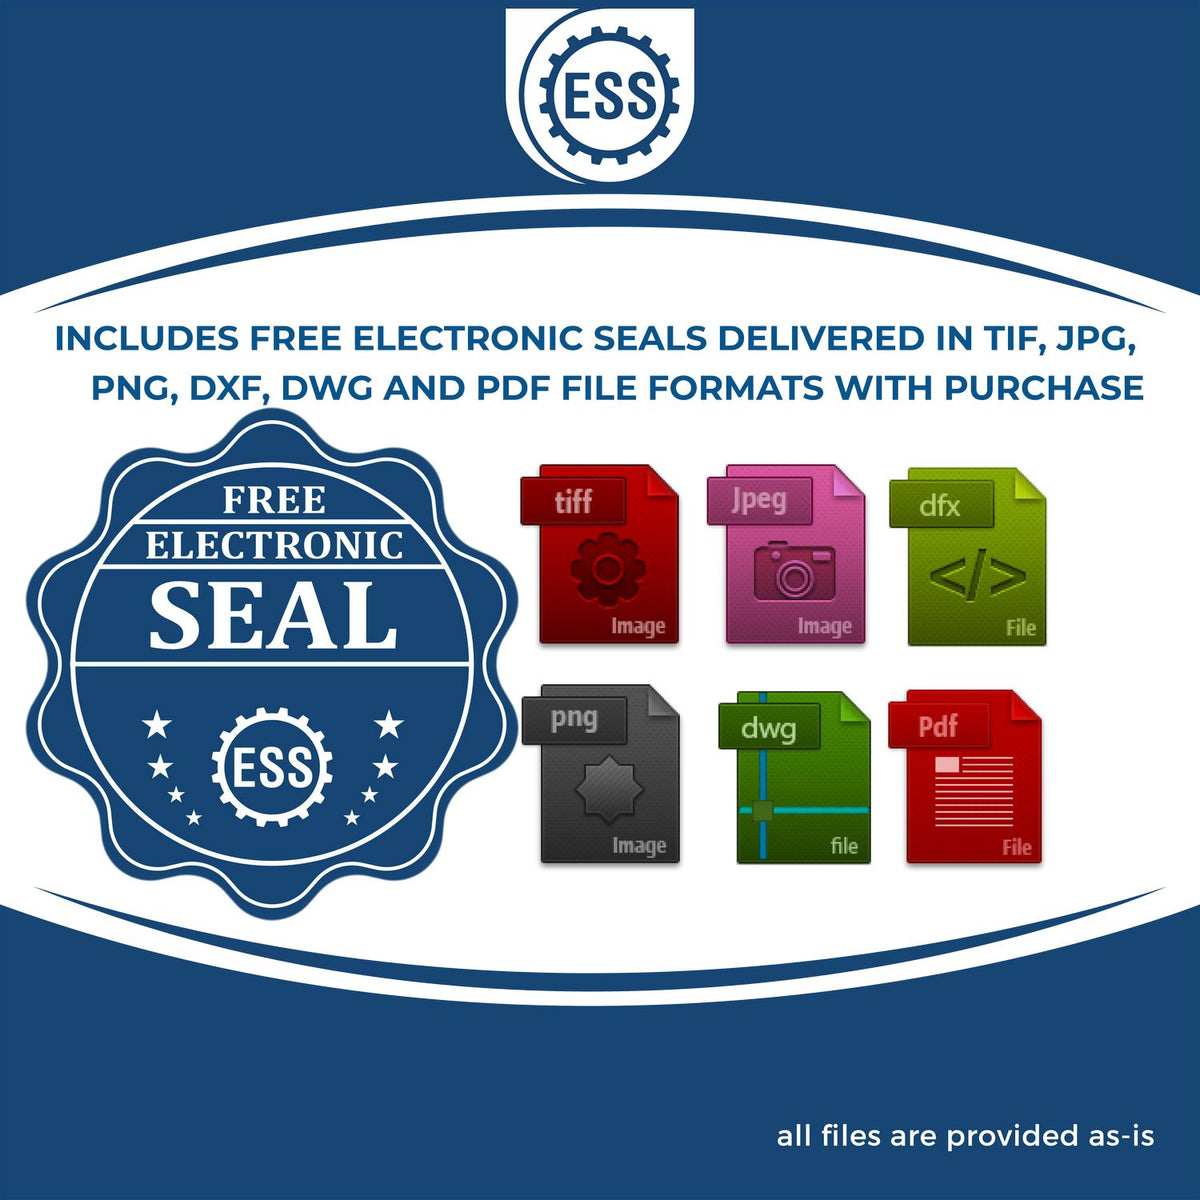 An infographic for the free electronic seal for the Soft Massachusetts Professional Engineer Seal illustrating the different file type icons such as DXF, DWG, TIF, JPG and PNG.